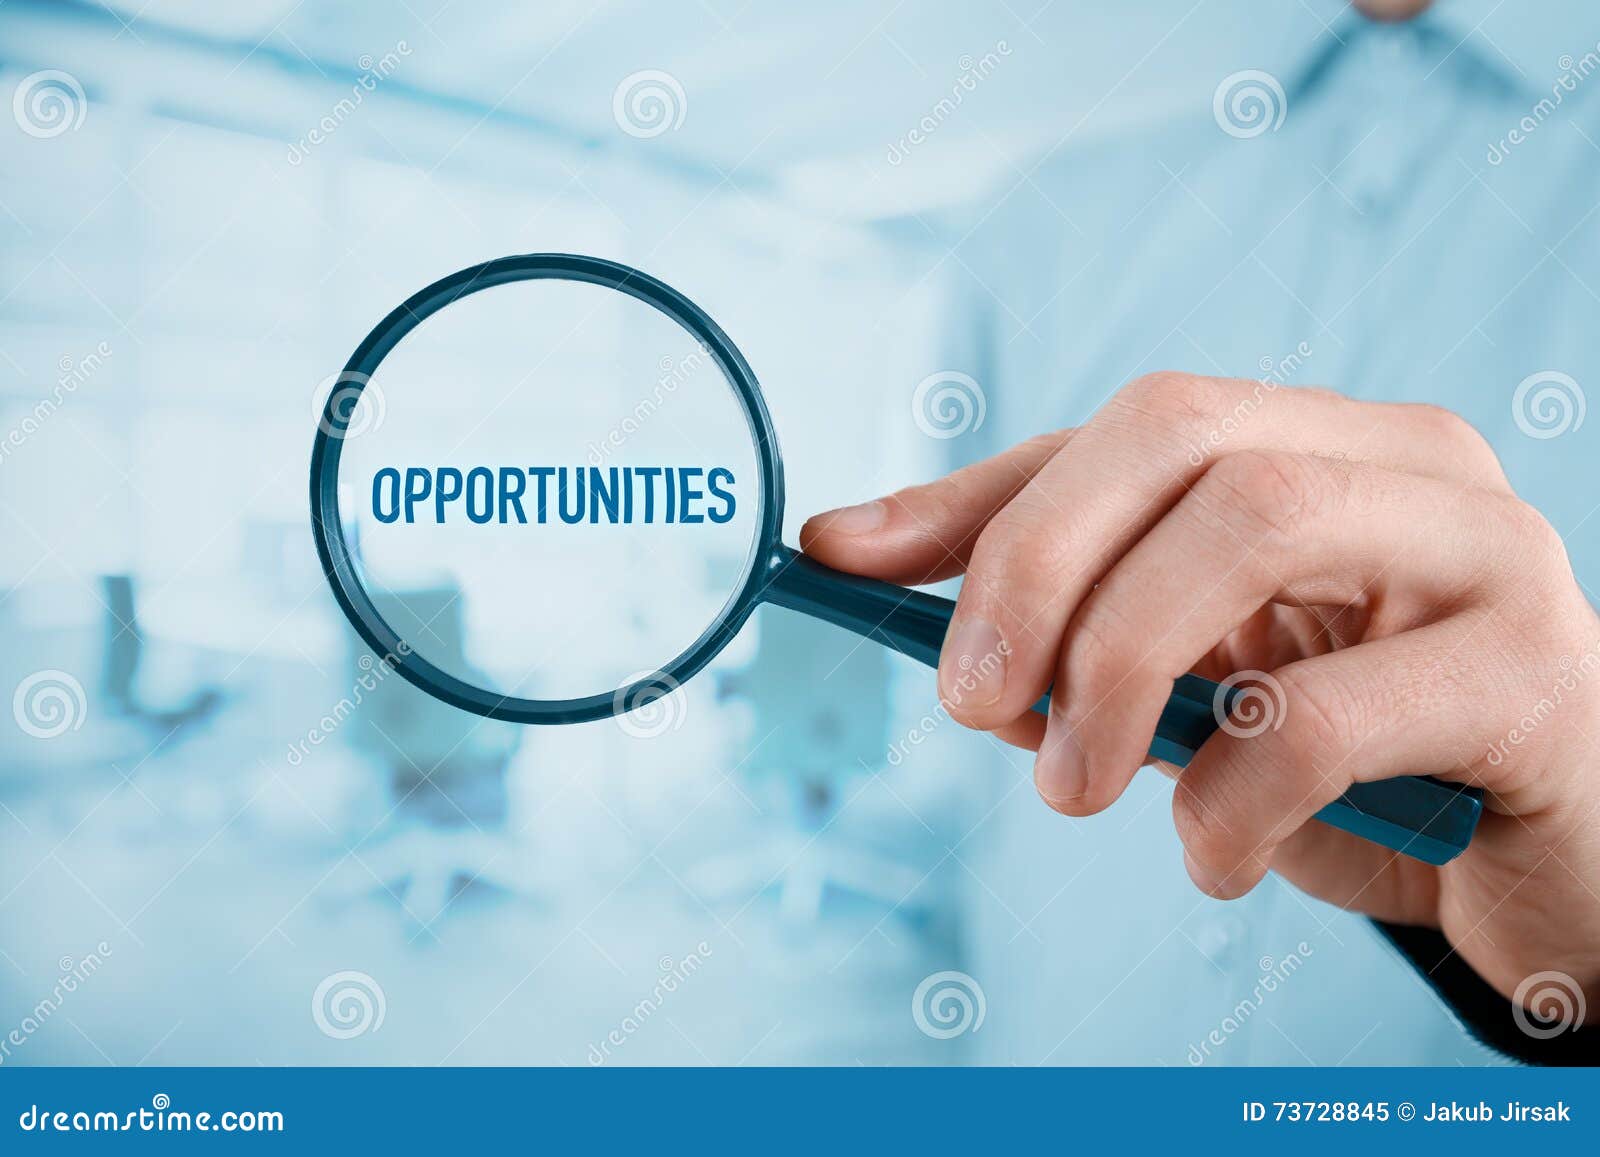 opportunities concept